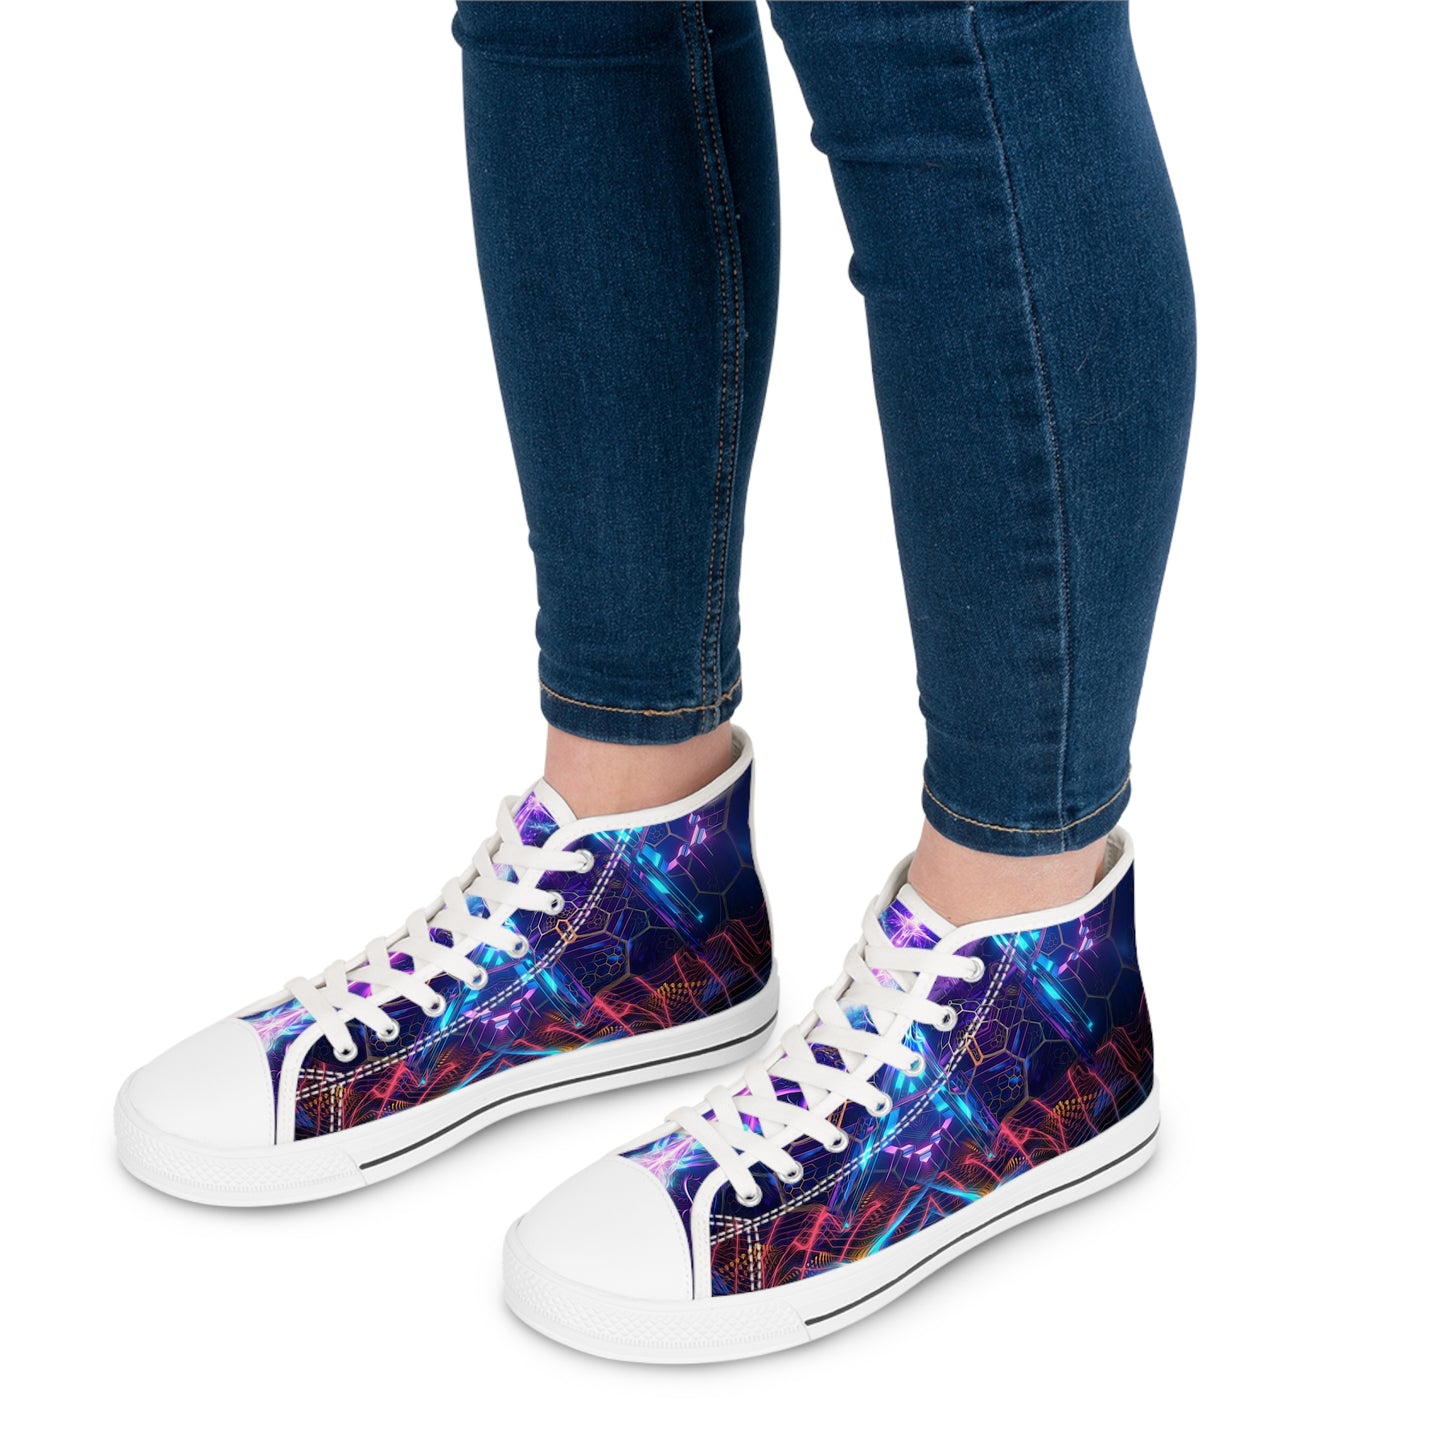 "ETH City V2" WOMEN'S HIGH TOP SNEAKERS